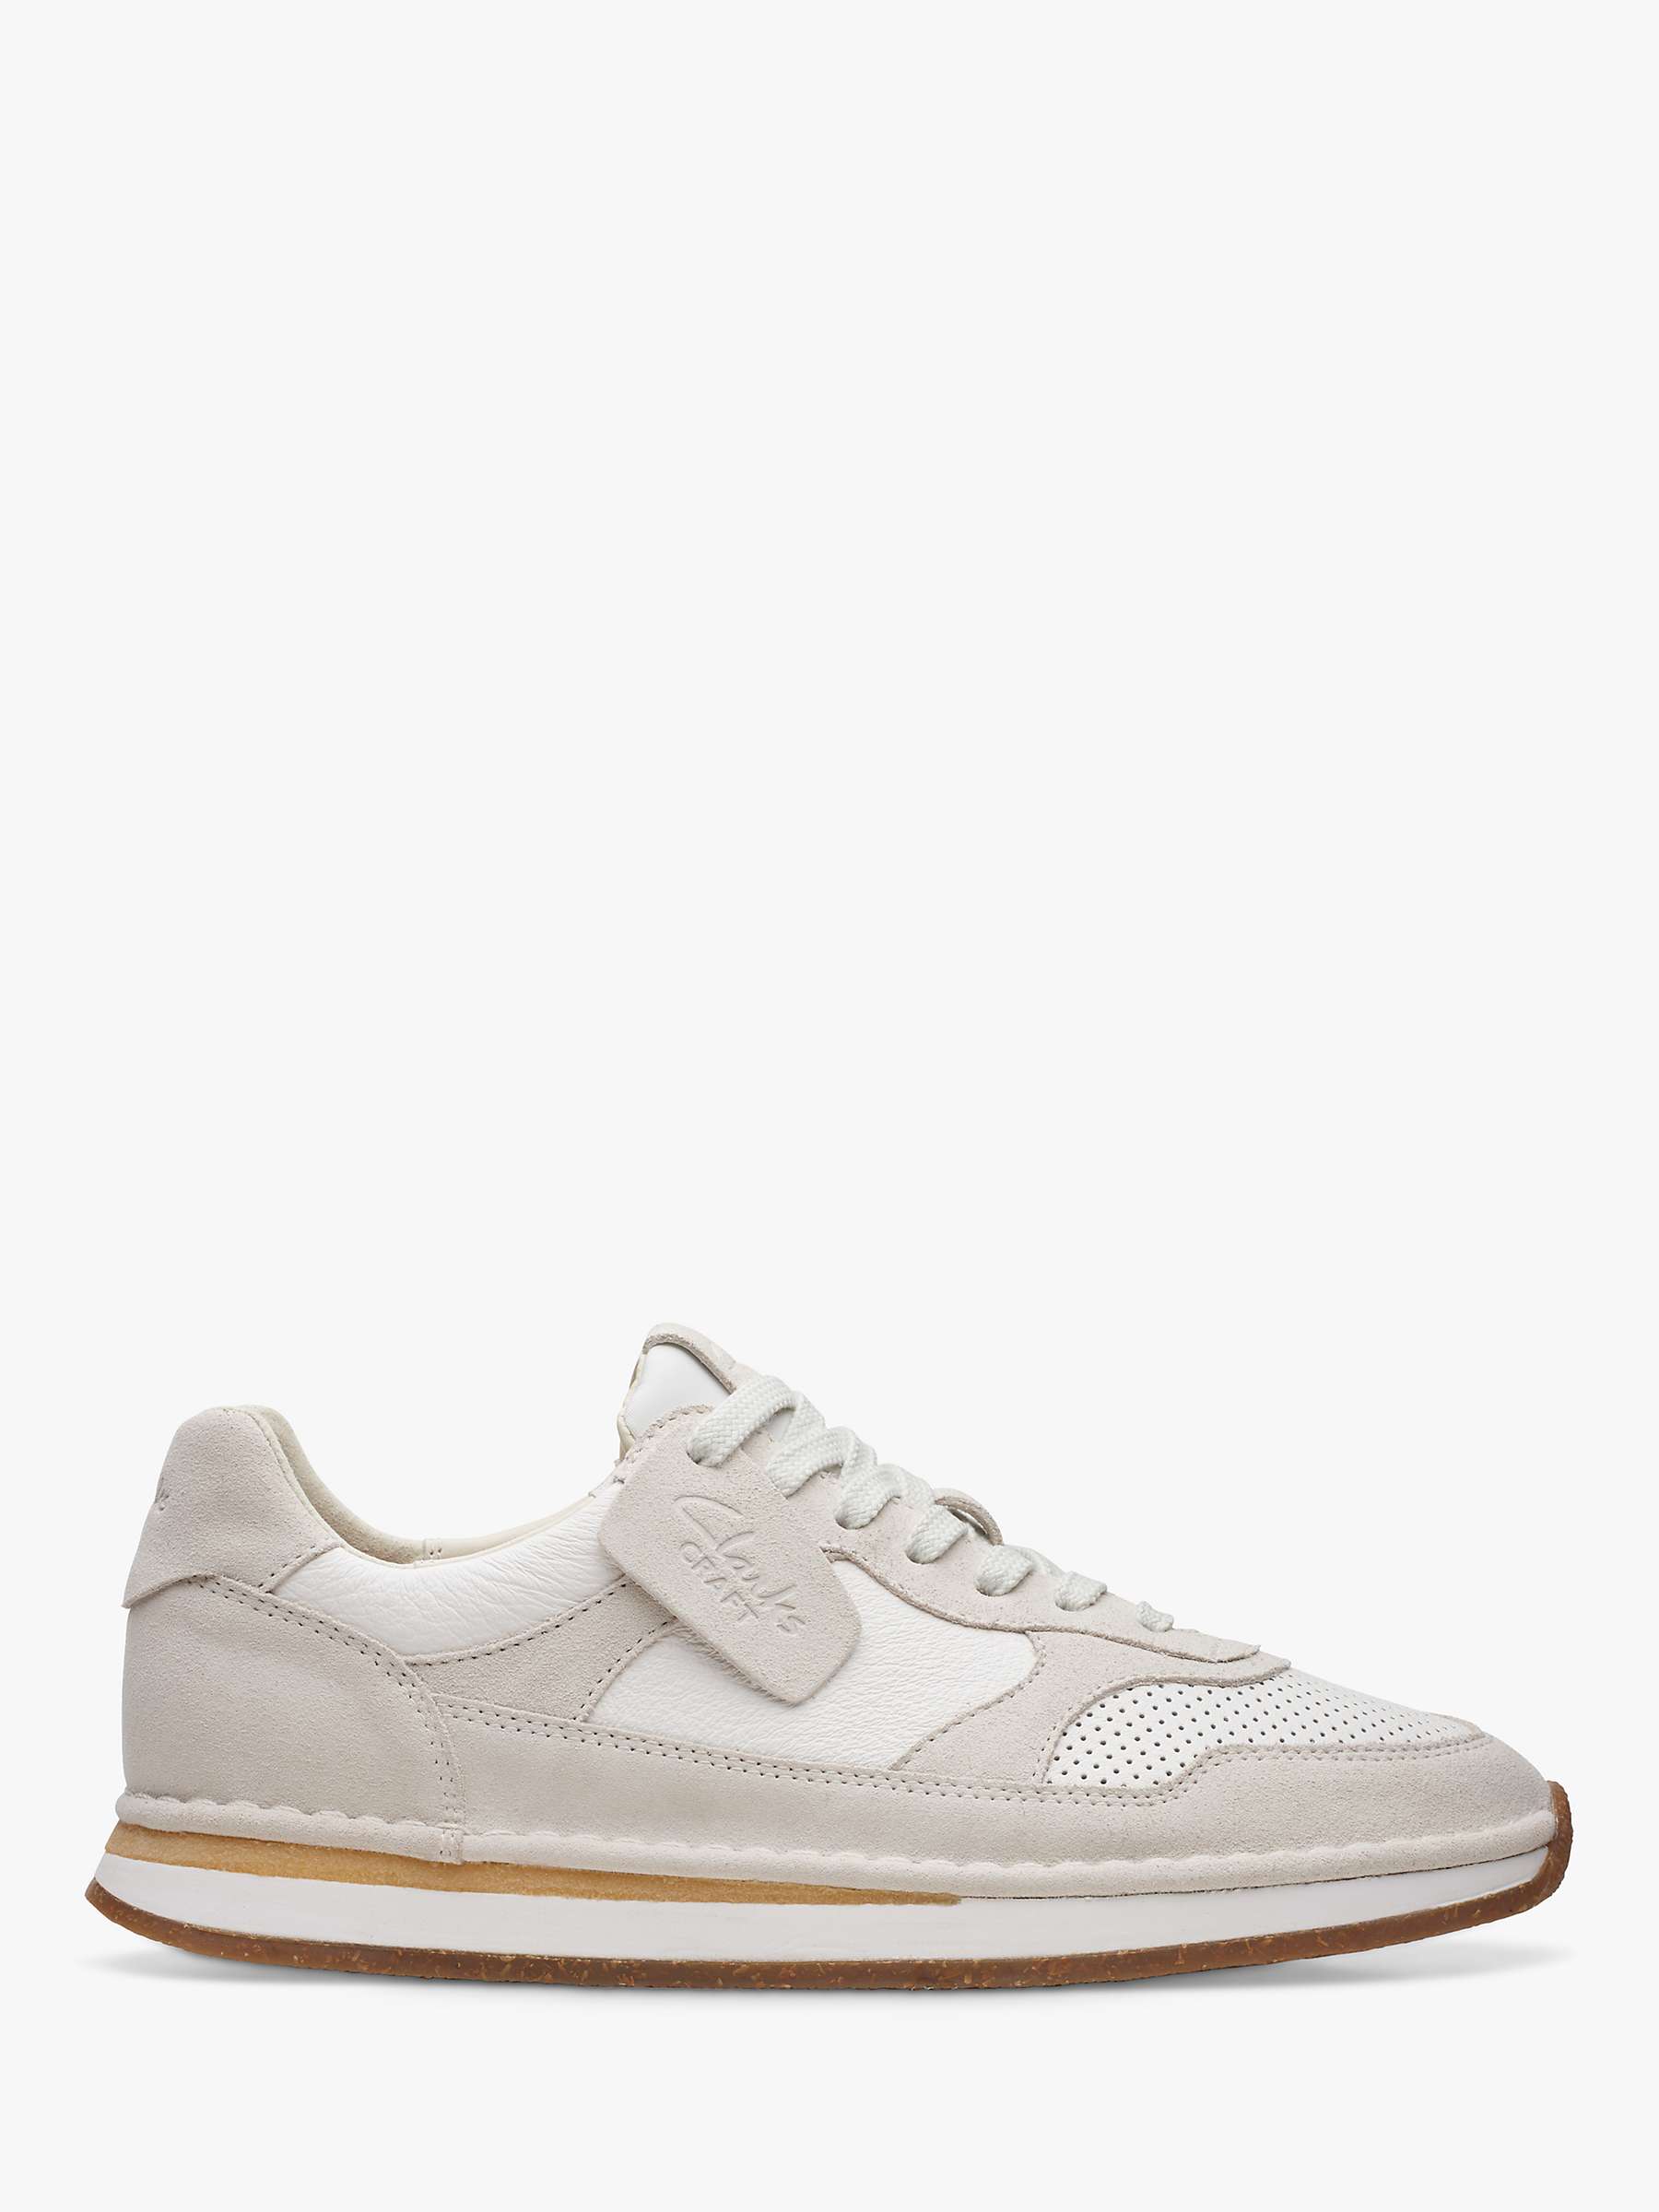 Clarks Craft Run Tor Trainers, White at John Lewis & Partners